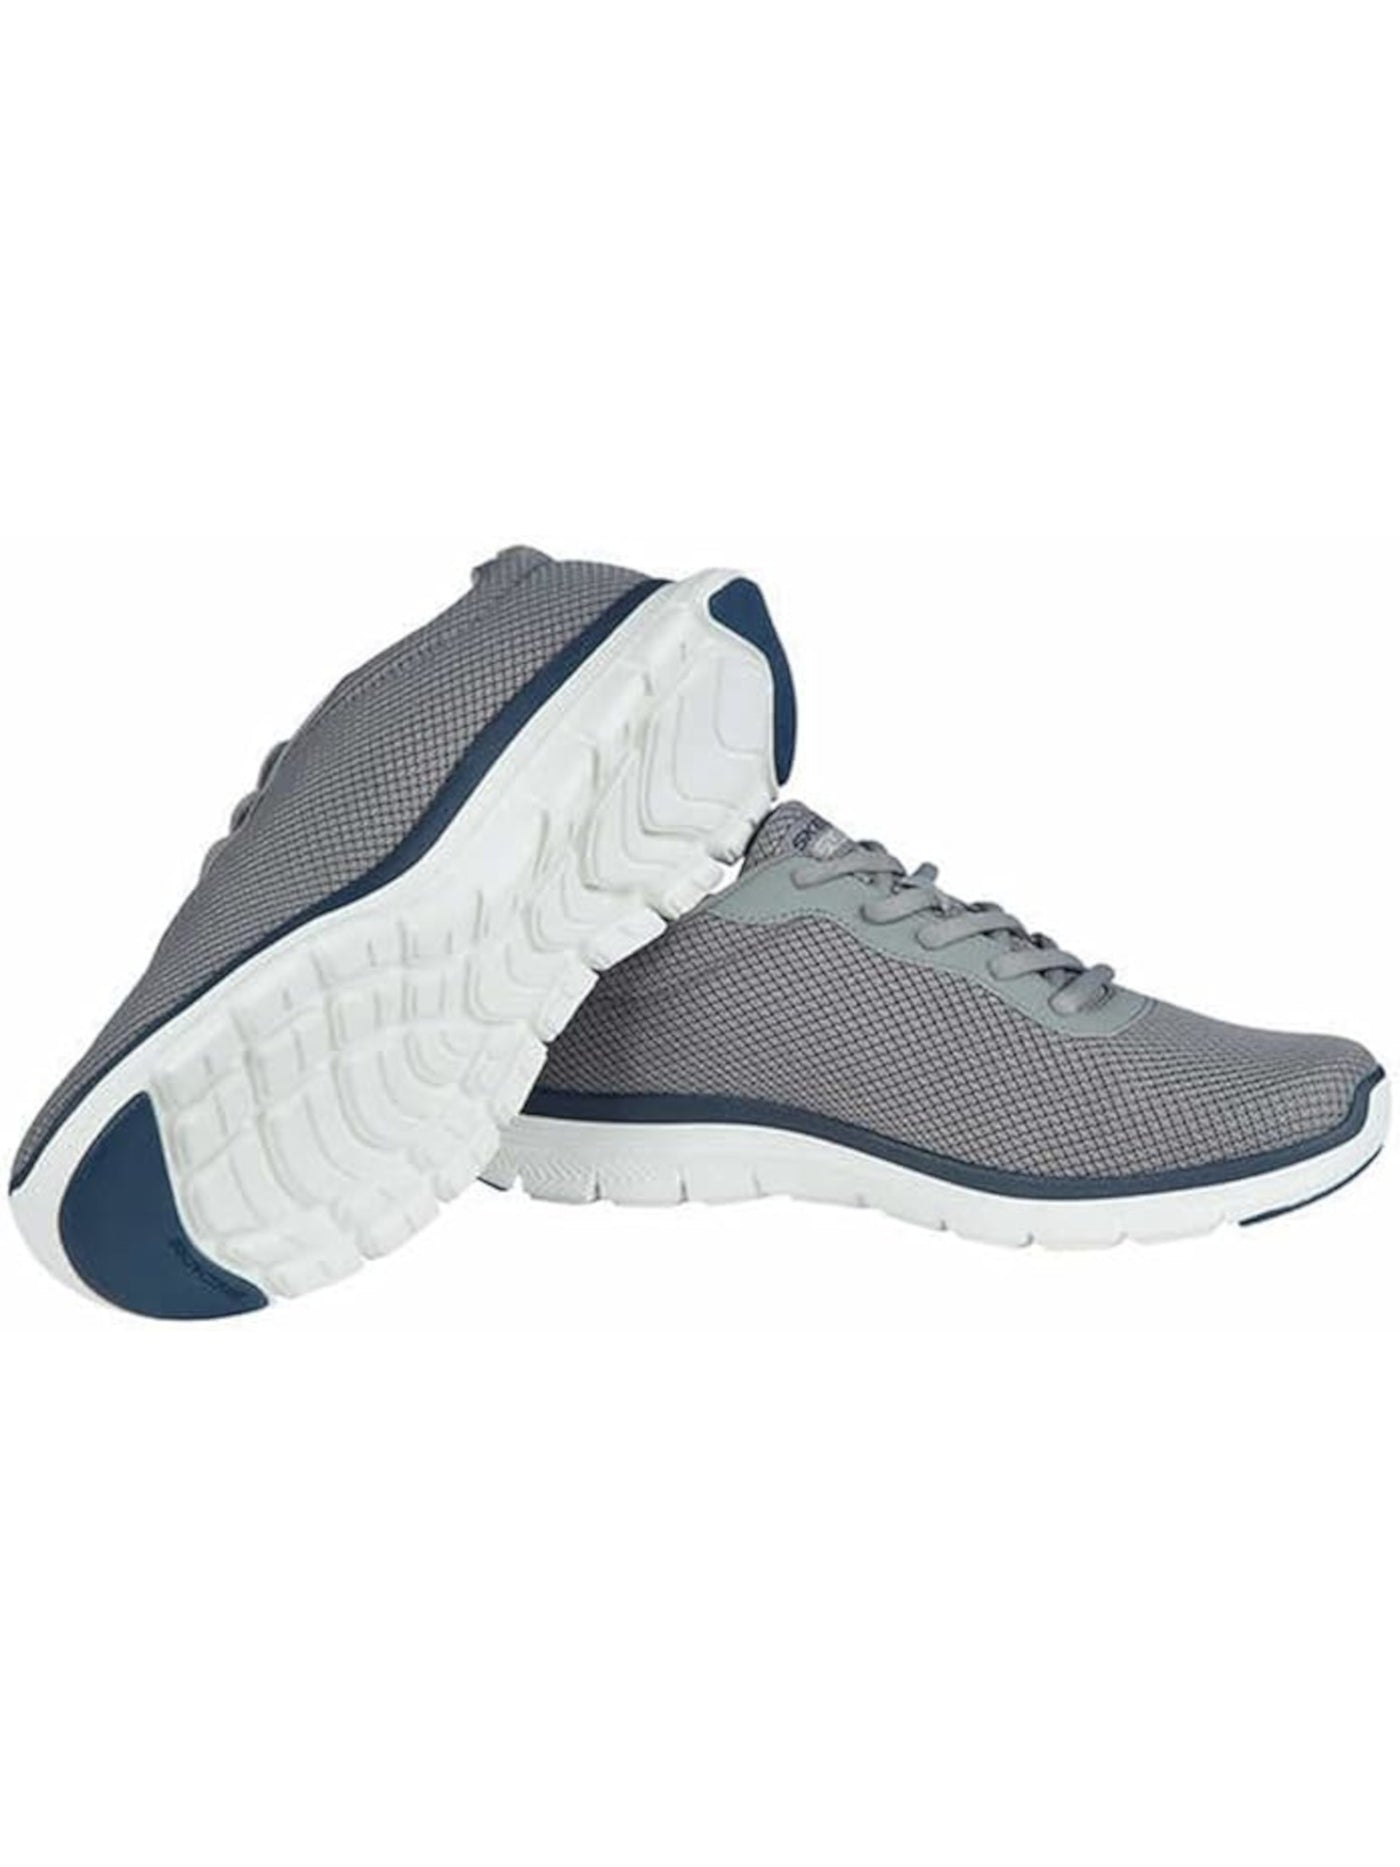 SKECHERS Mens Gray Mesh Logo Heel Pull-Tab Flexible Flex Round Toe Wedge Lace-Up Athletic Training Shoes